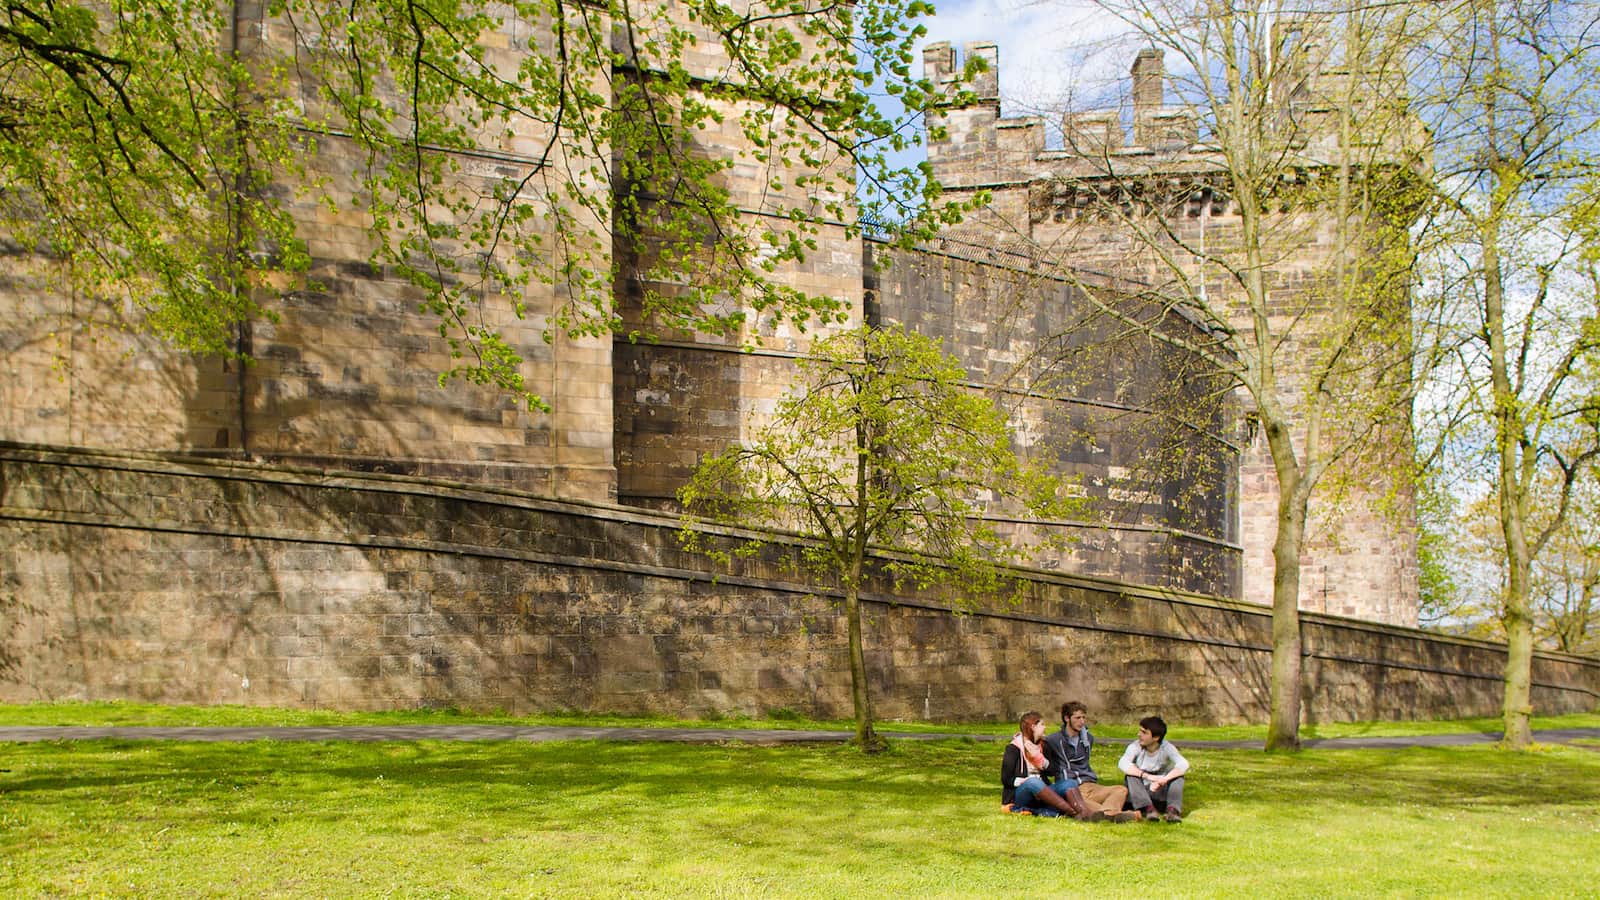 Students sit on the grass outside the walls of Lancaster Castle